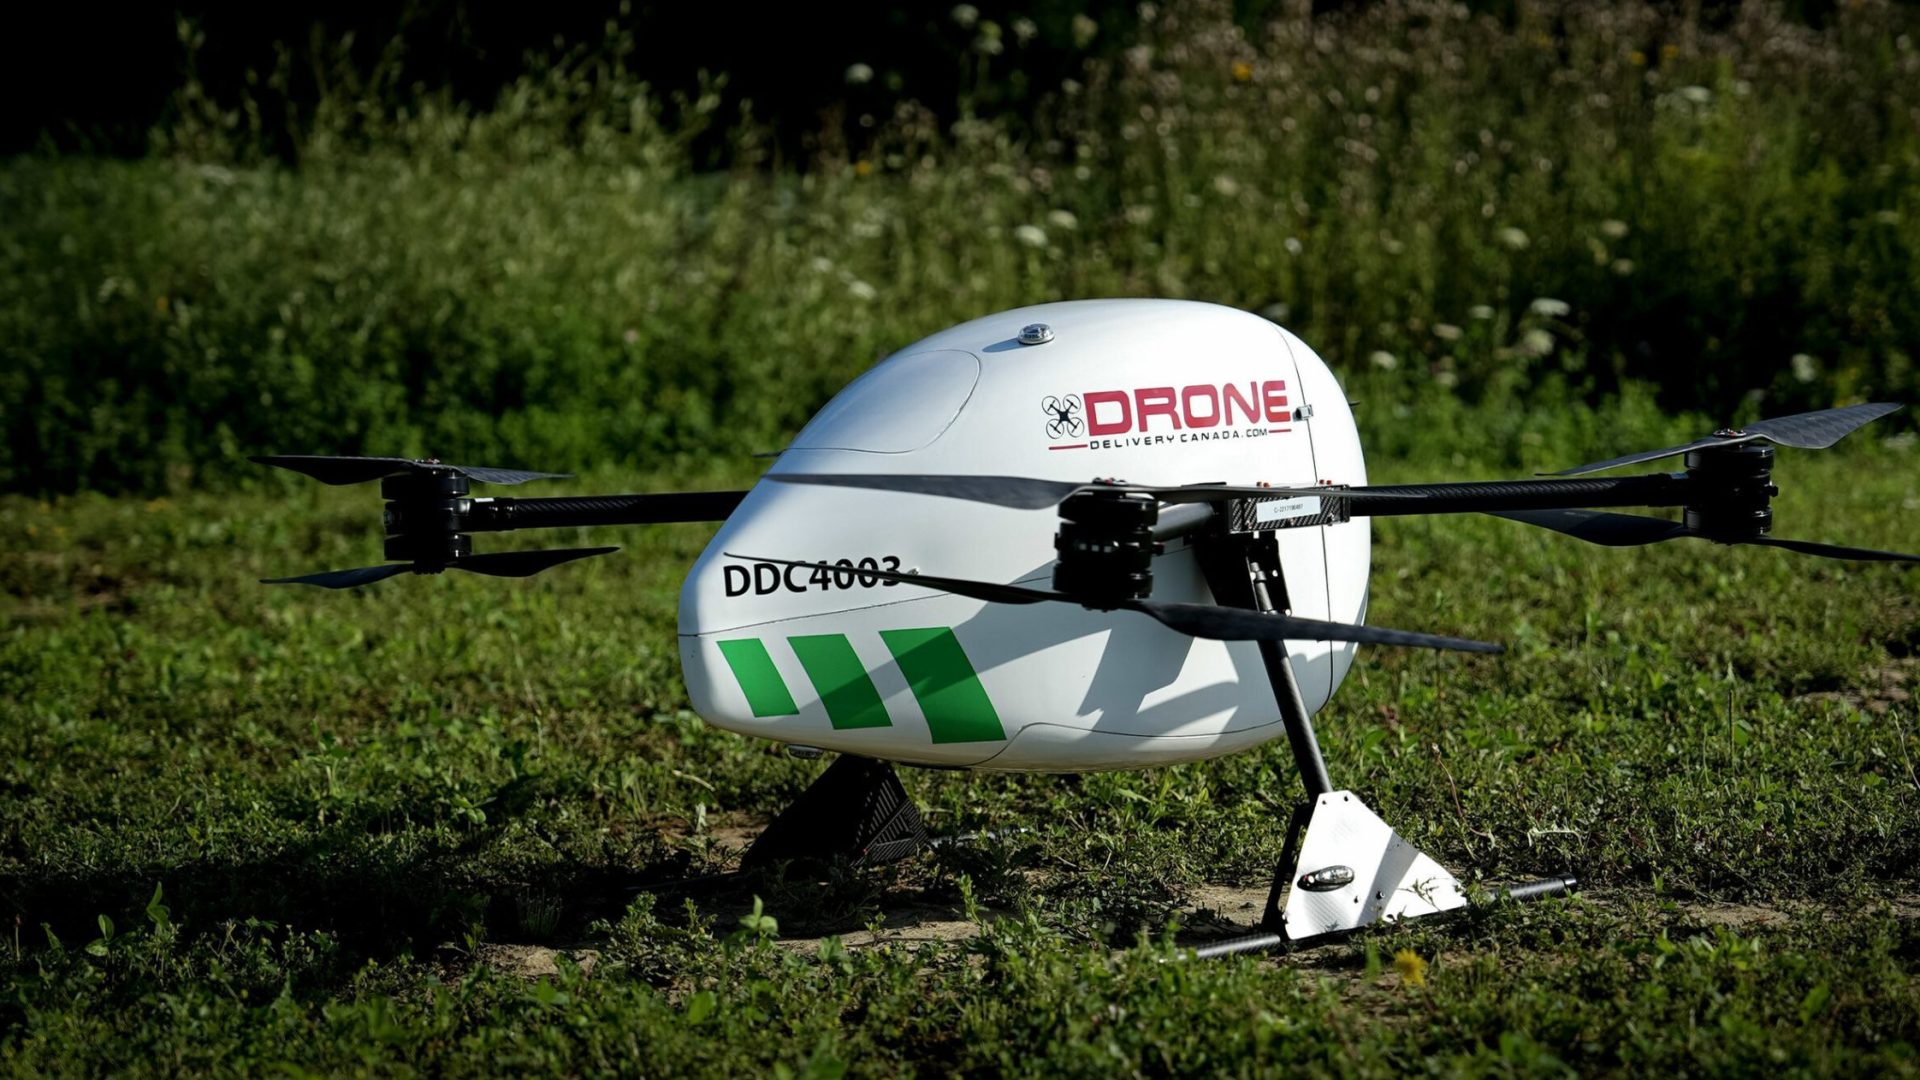 Drone Delivery Canada canary drone parked on grass